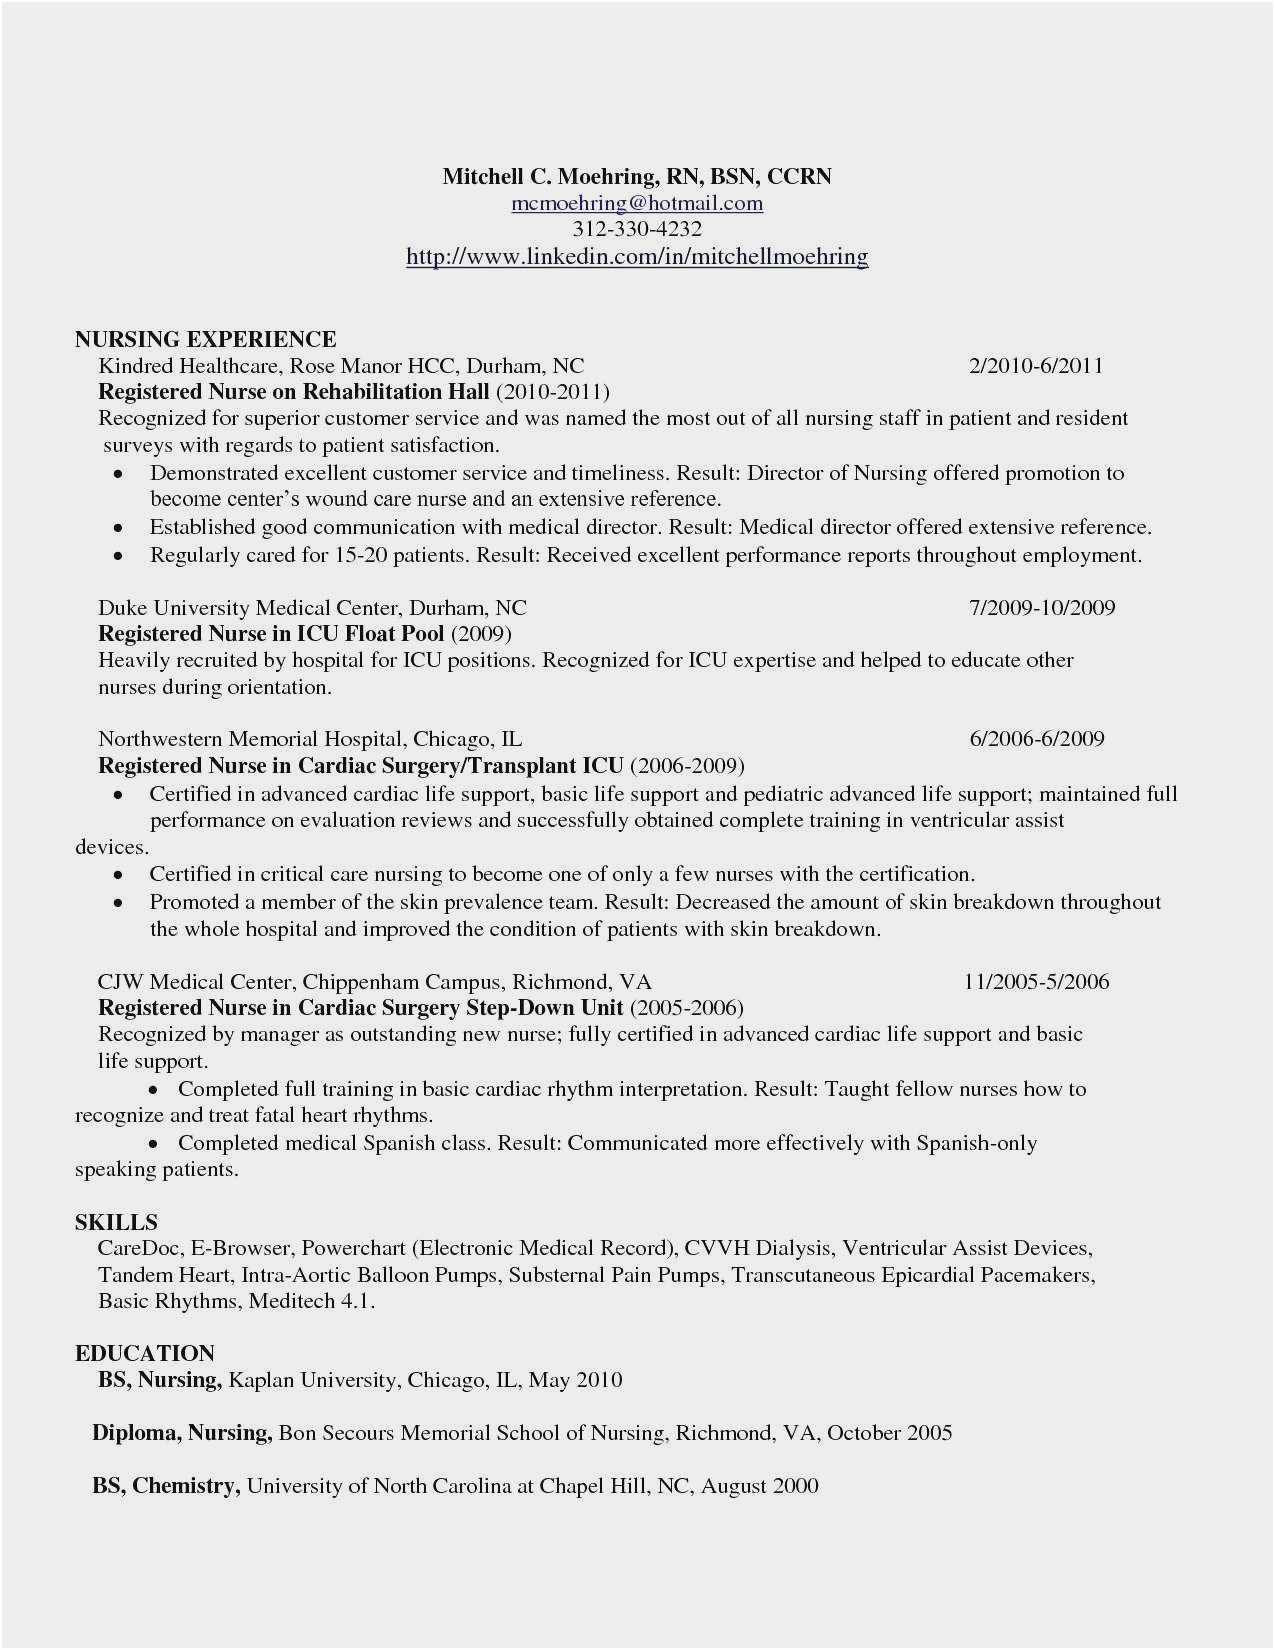 Sample Resume for Administrative assistant with No Experience Free Collection 51 Resume with No Experience 2019